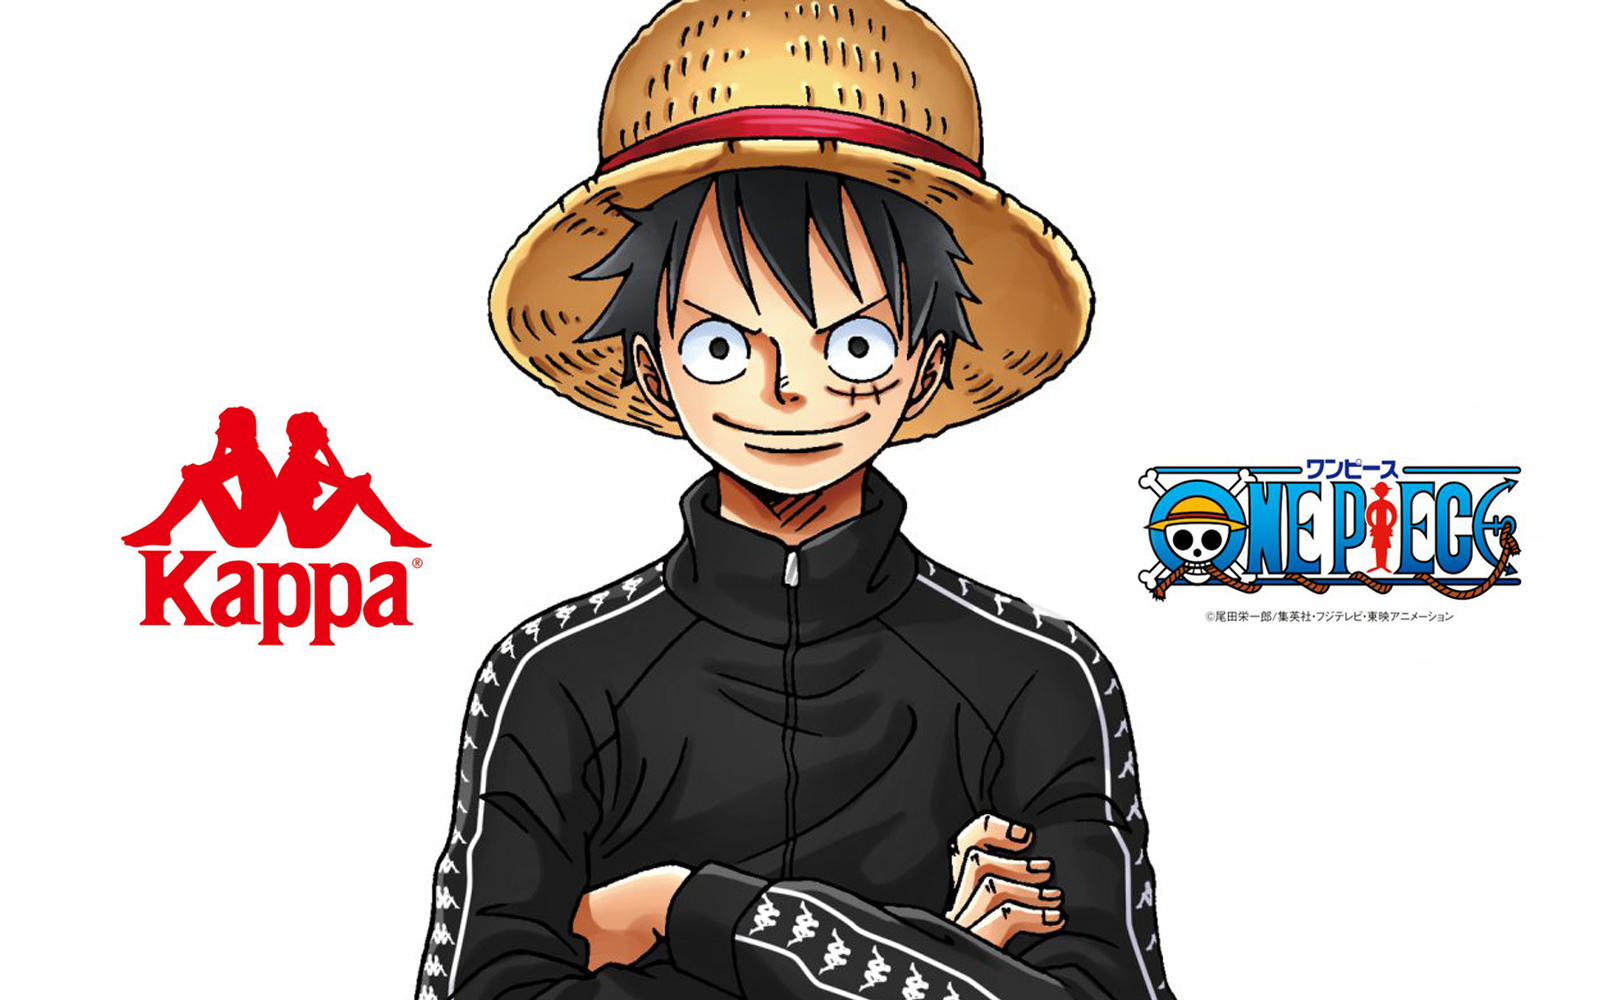 Six characters from One Piece reinterpretate the iconic logo by Kappa